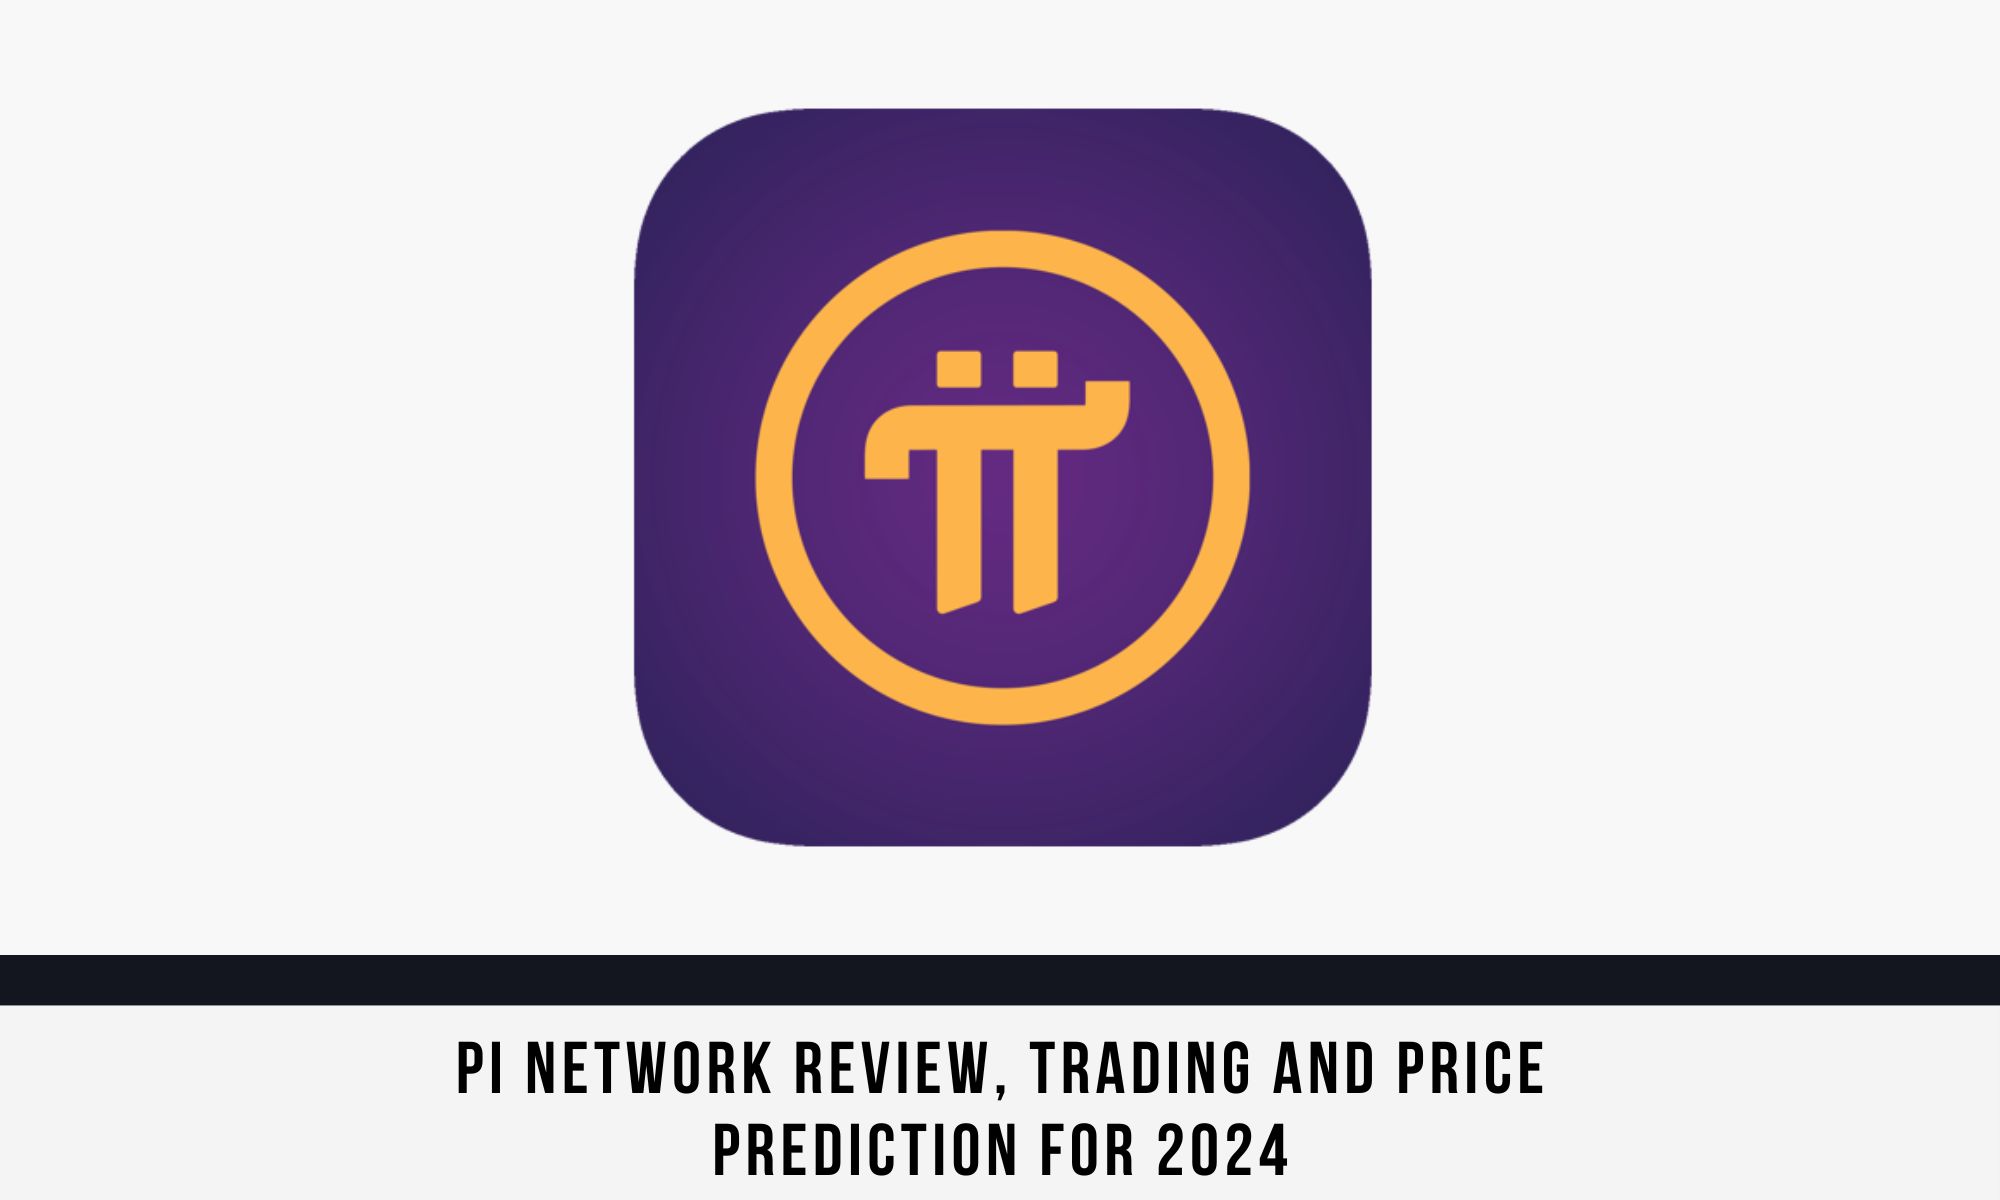 Pi Network Review, Trading and Price Prediction for 2024